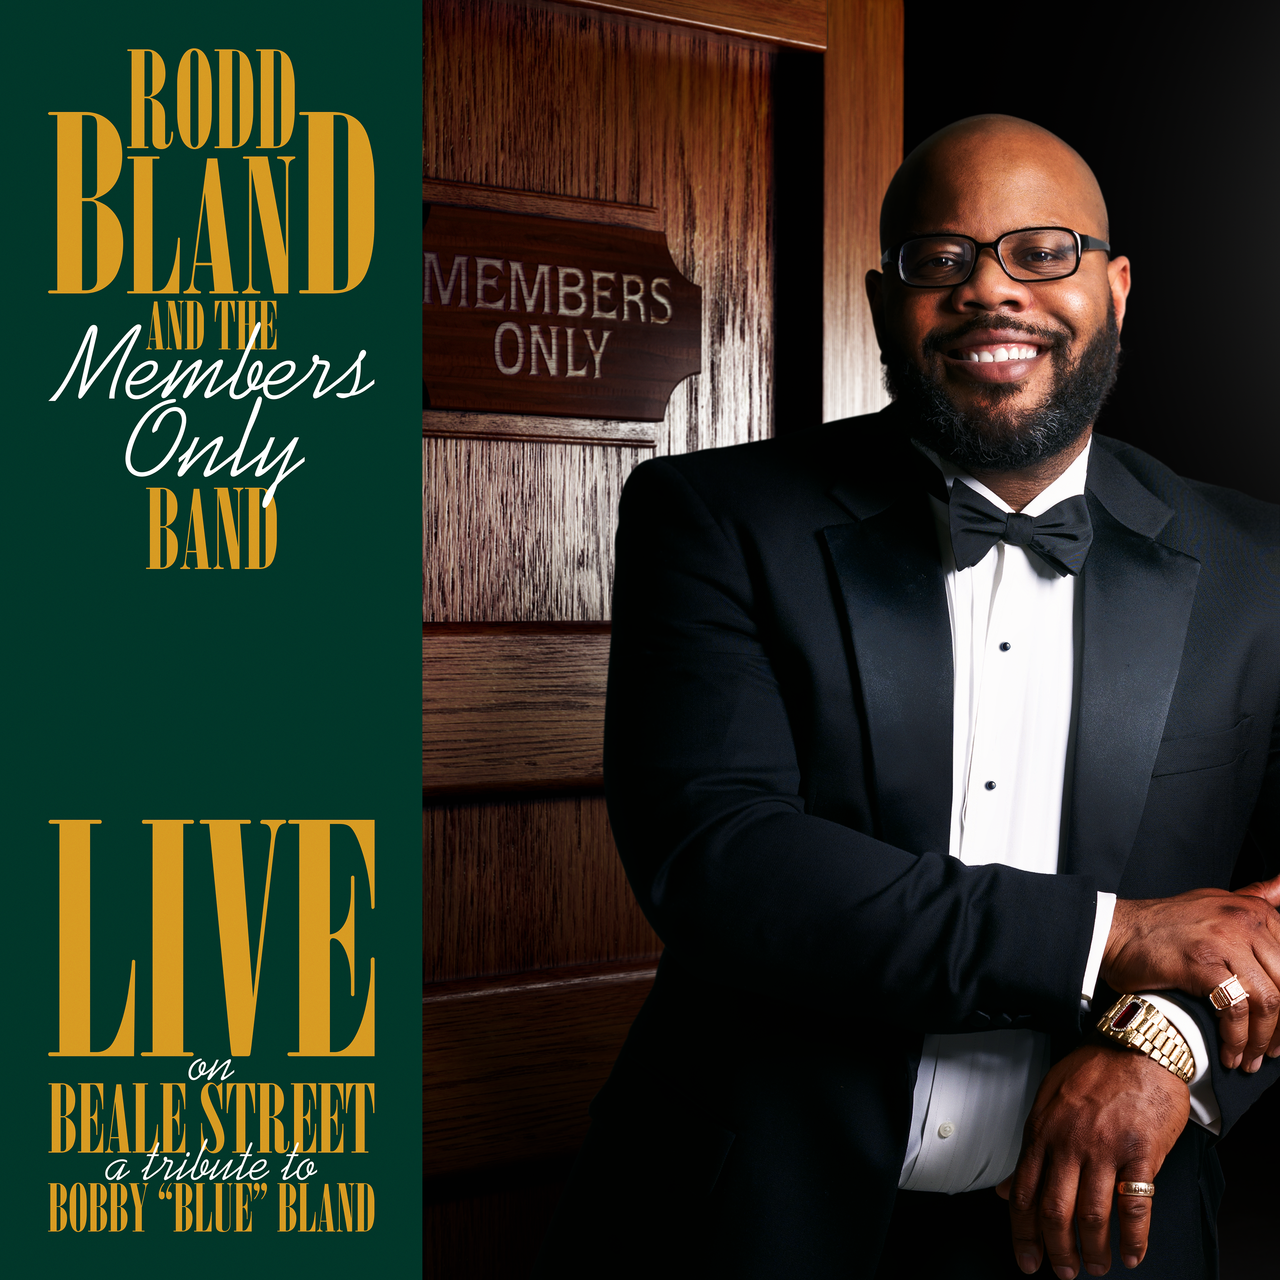 Rodd Bland And The Members Only Band - Live on Beale Street: A Tribute To Bobby "Blue" Bland